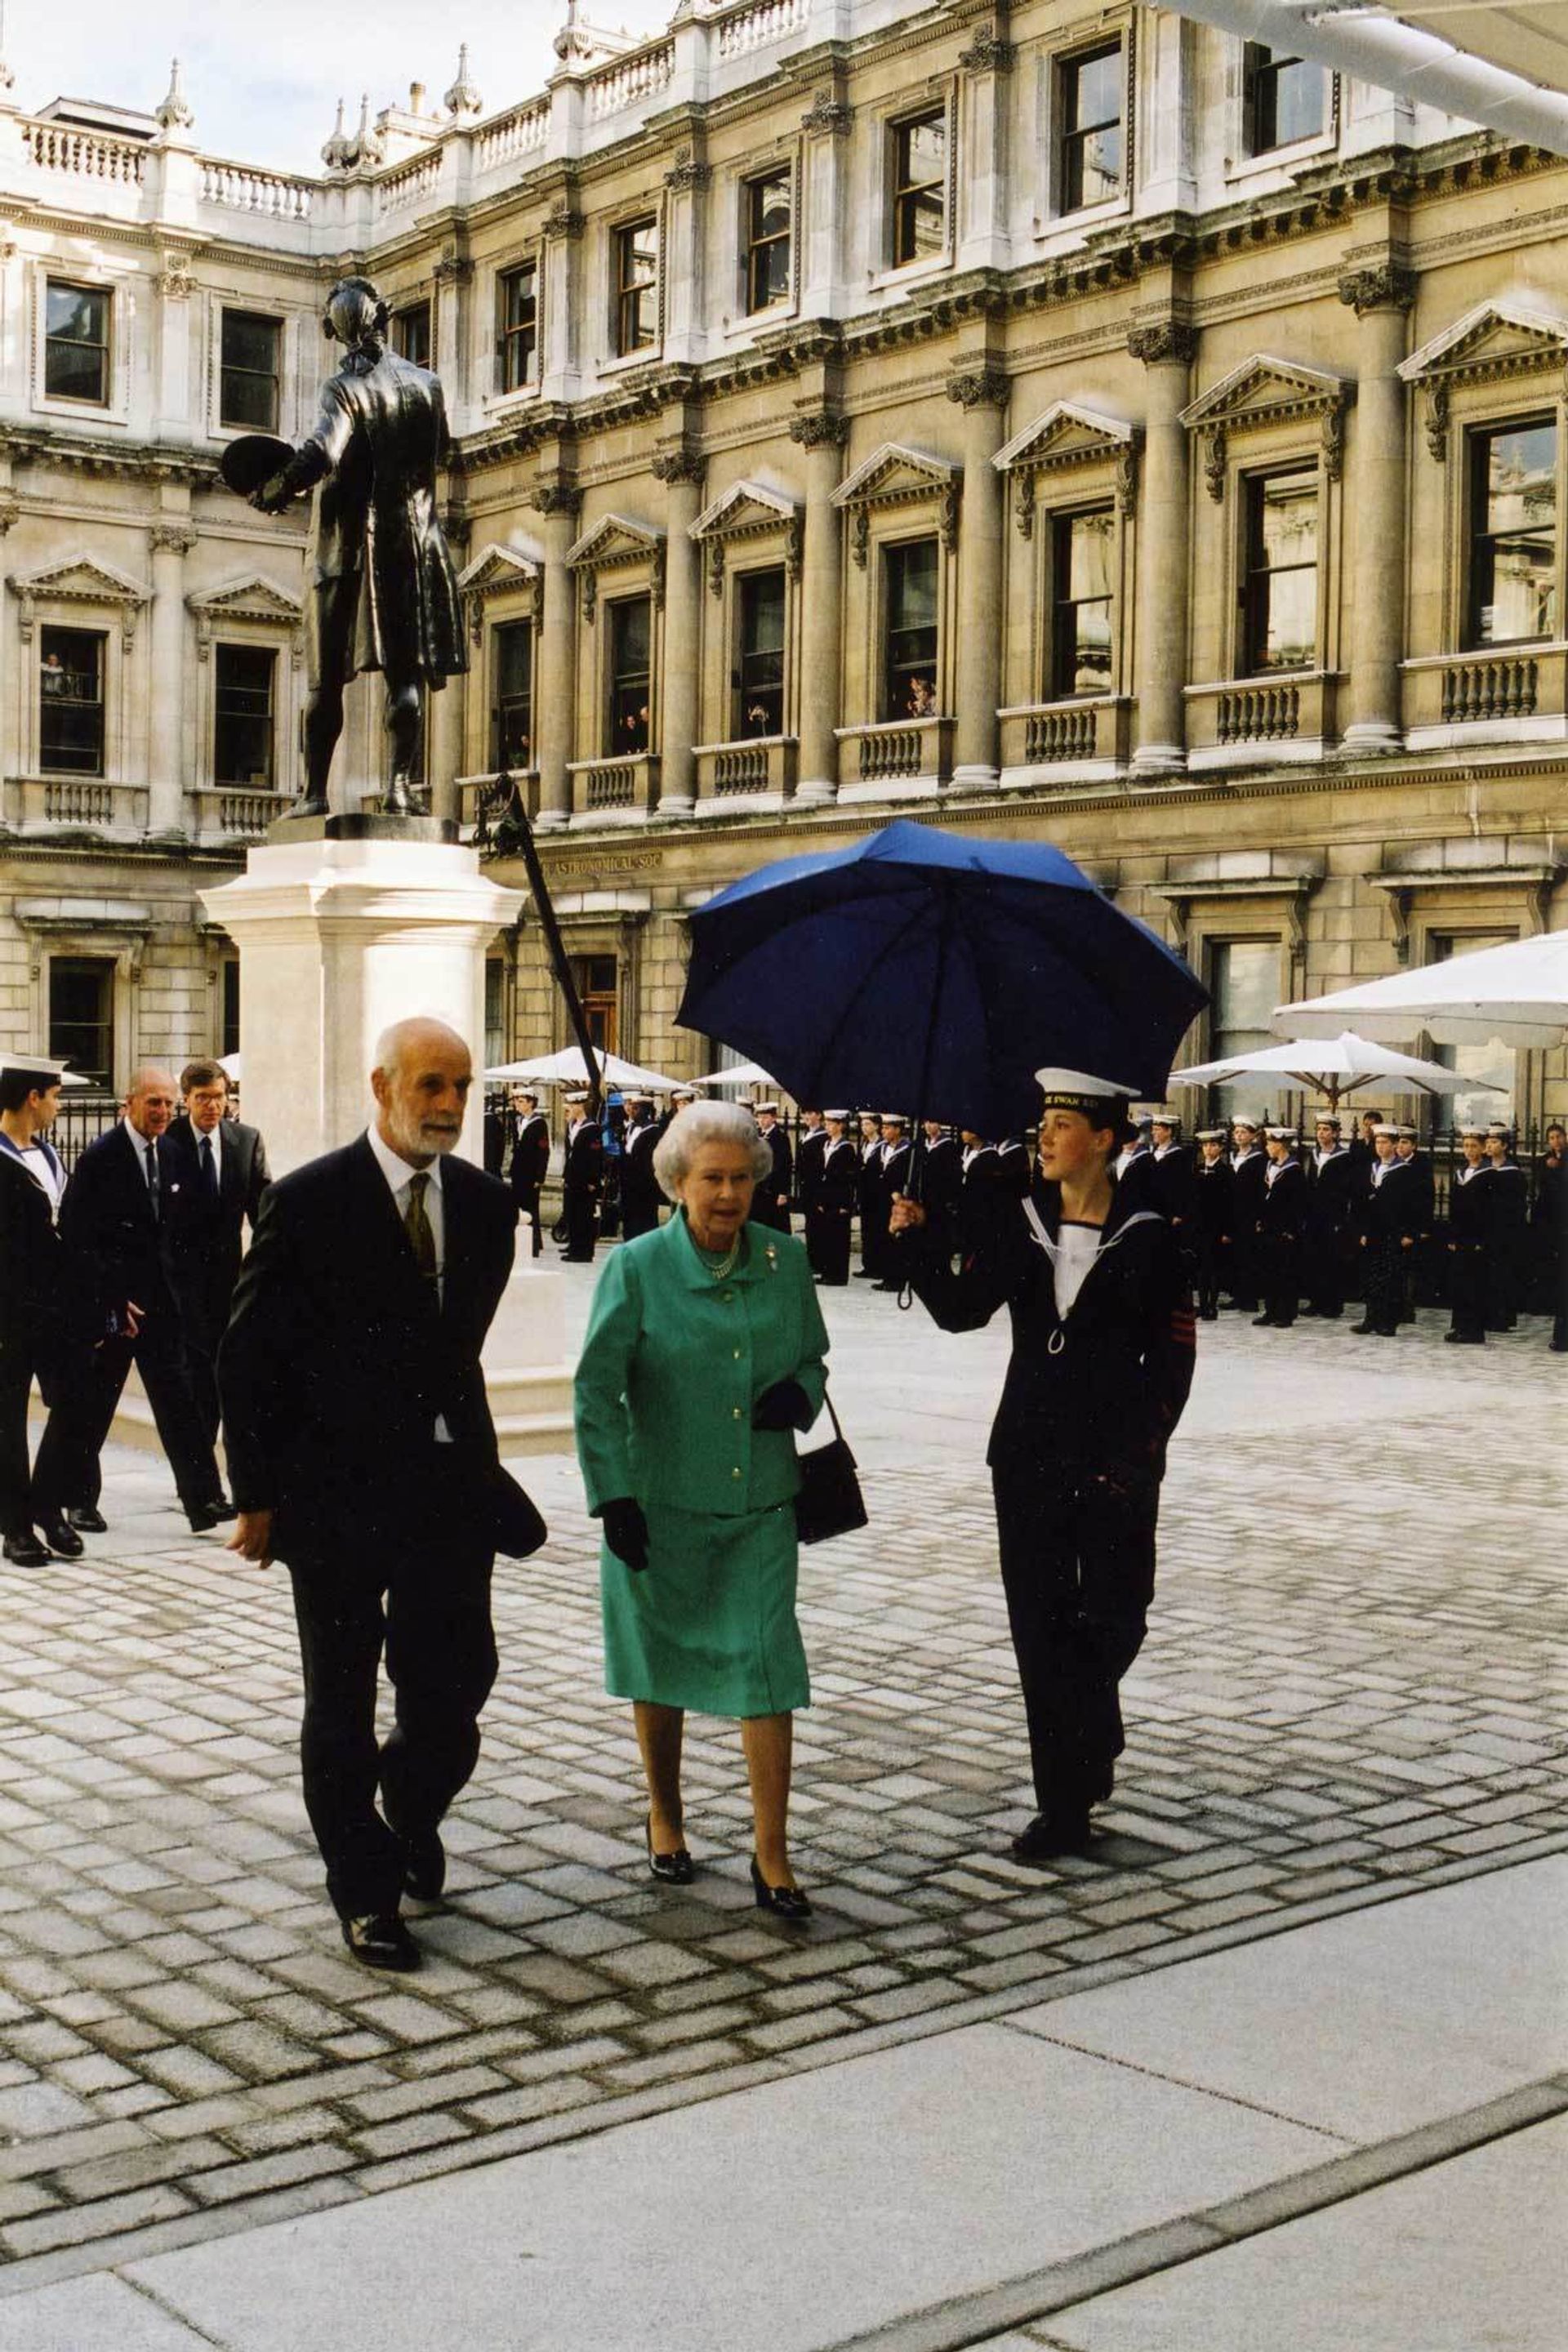 Queen Elizabeth II at the opening of the Royal Academy's Annenberg Courtyard, 2002, with Phillip King. © Photo: Royal Academy of Arts, London